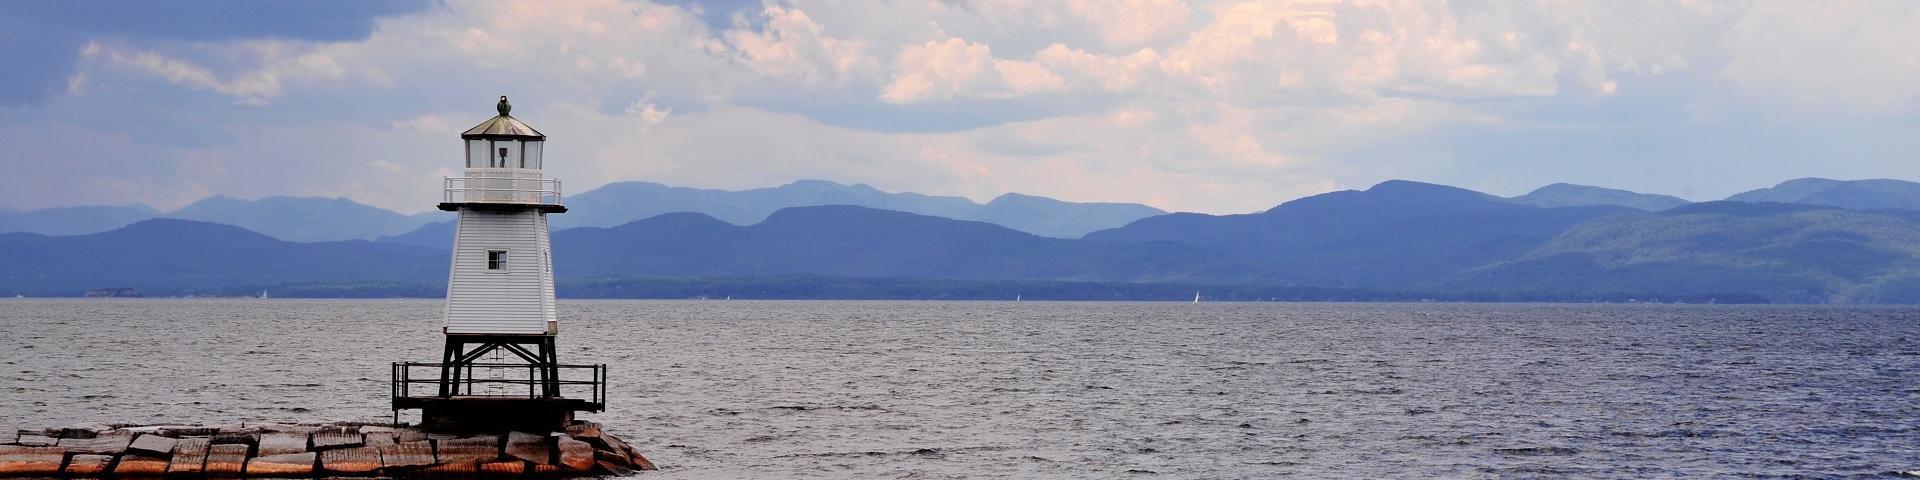 Lighthouse on Lake Champlain with view of mountains